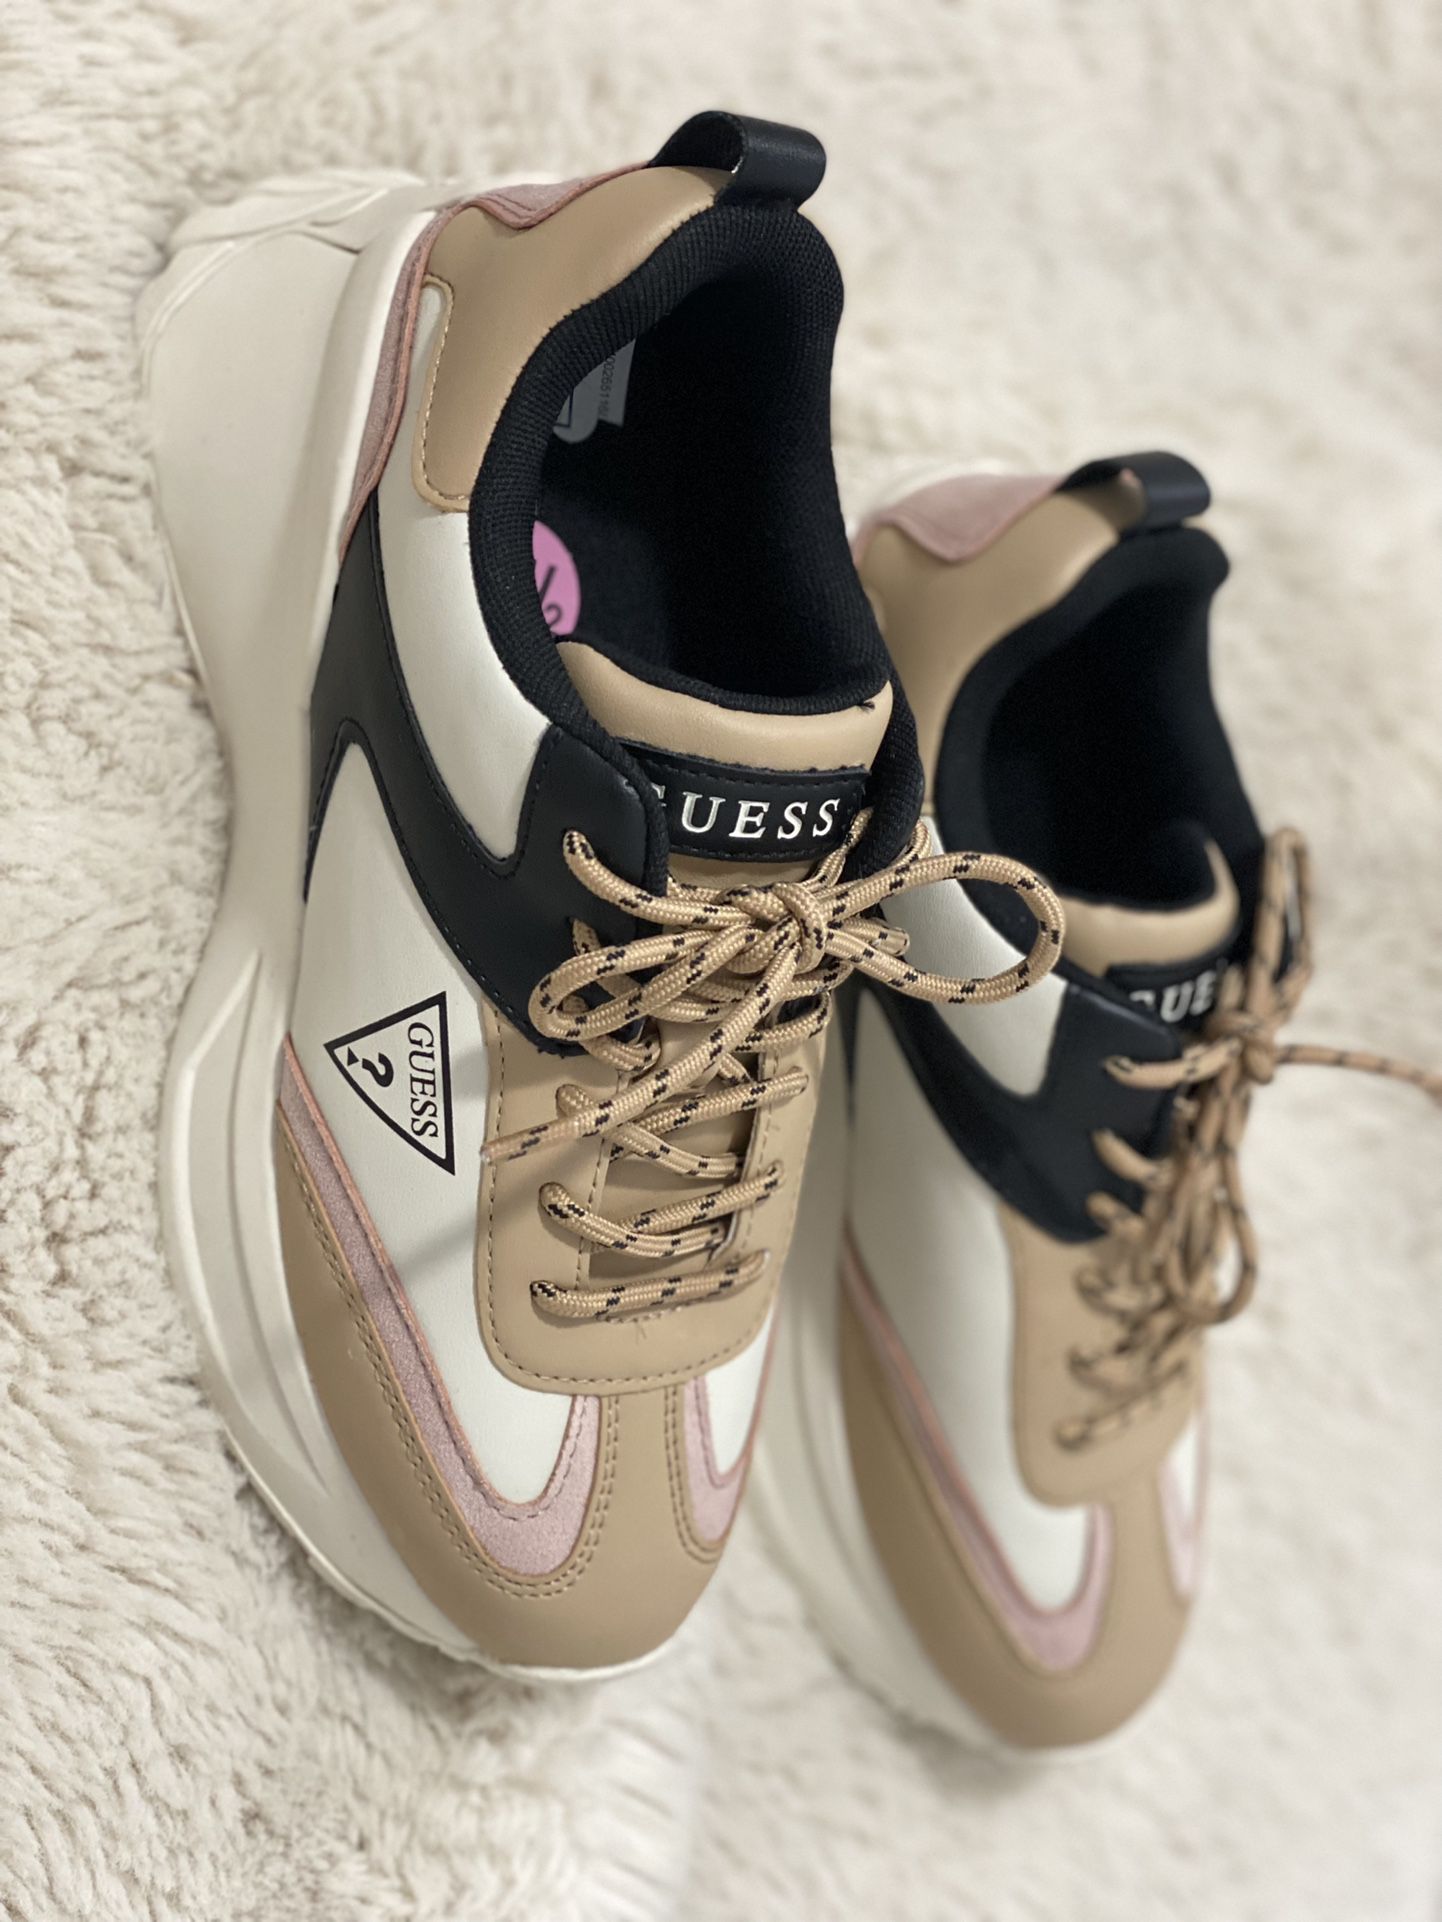 Guess Shoes 